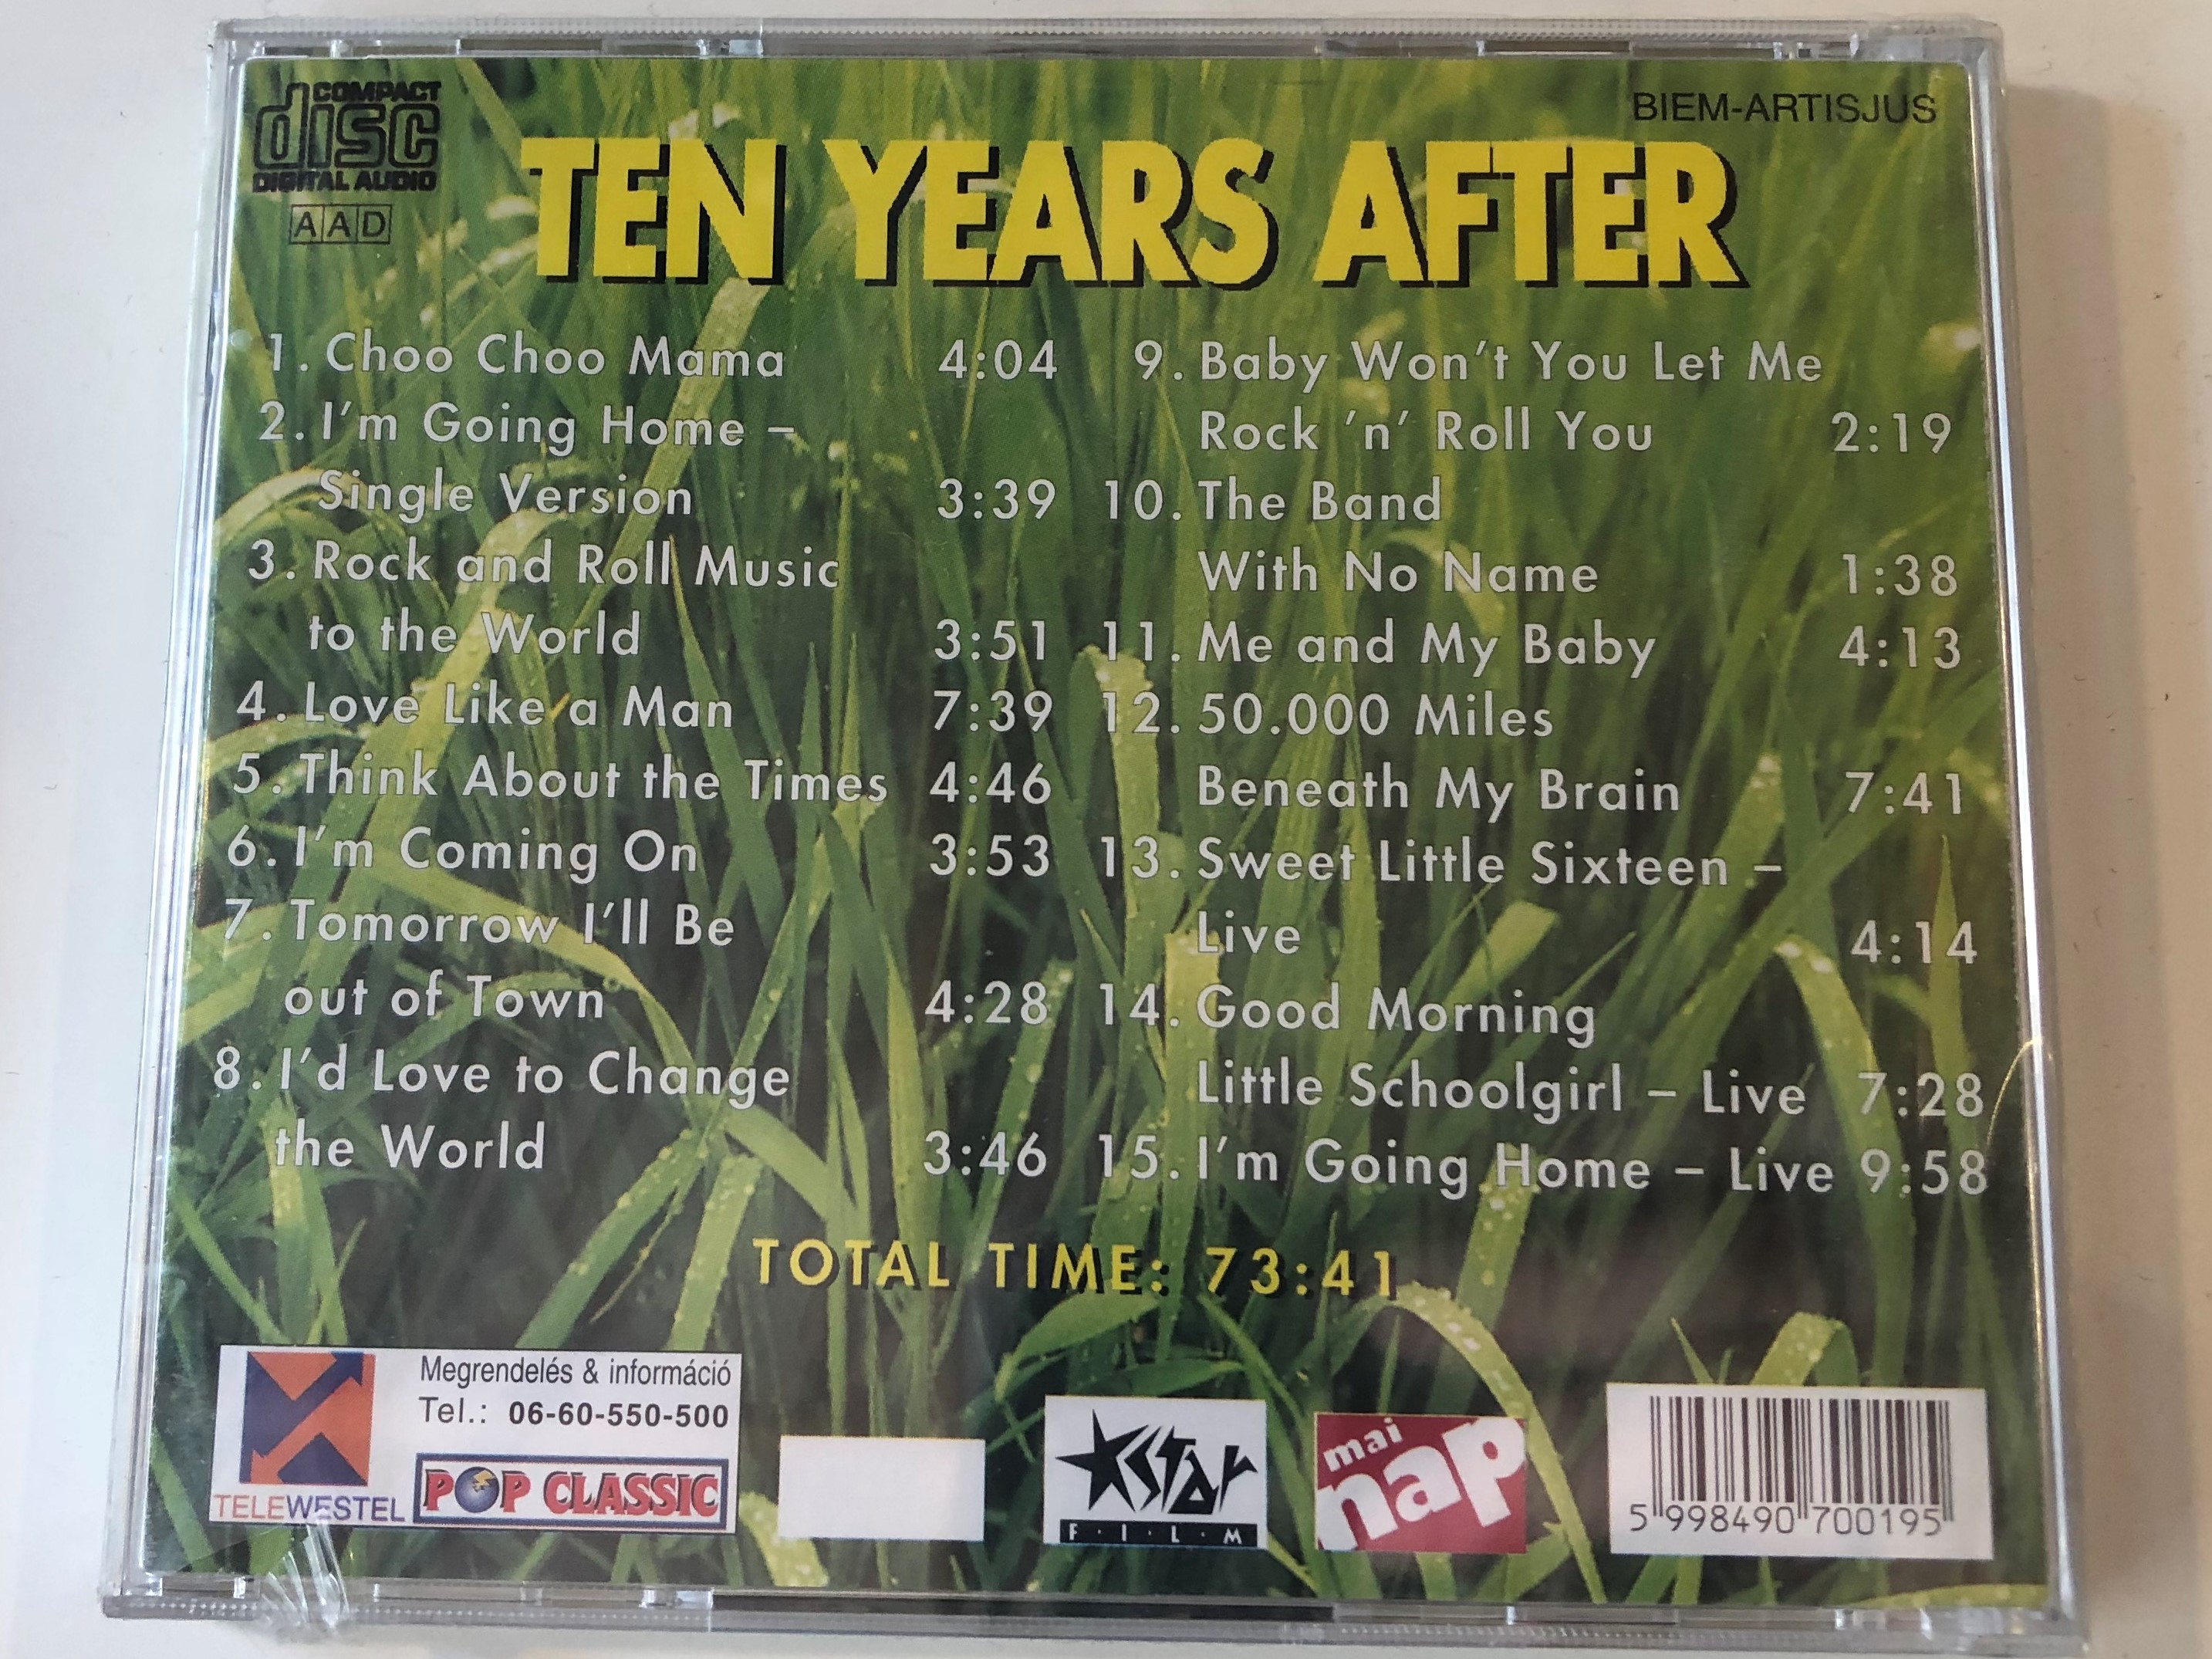 ten-years-after-best-of-total-time-7341-pop-classic-euroton-audio-cd-5998490700195-2-.jpg